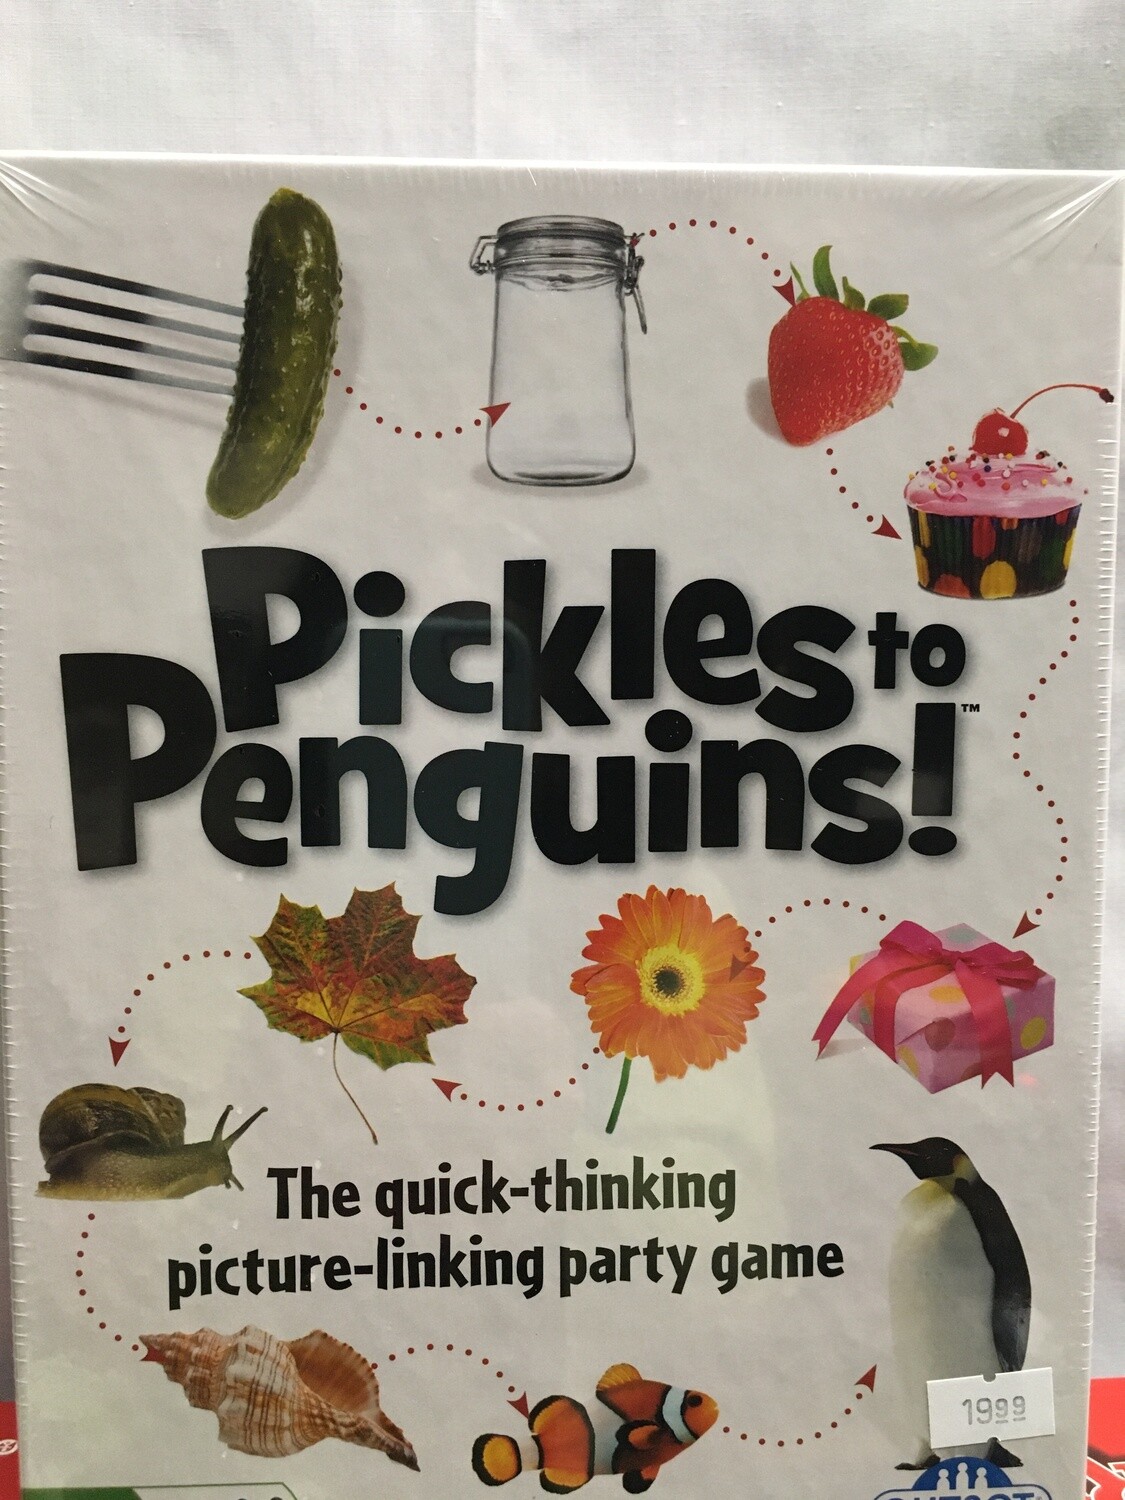 Pickles to Penguins! Family Game - ages 8 and up